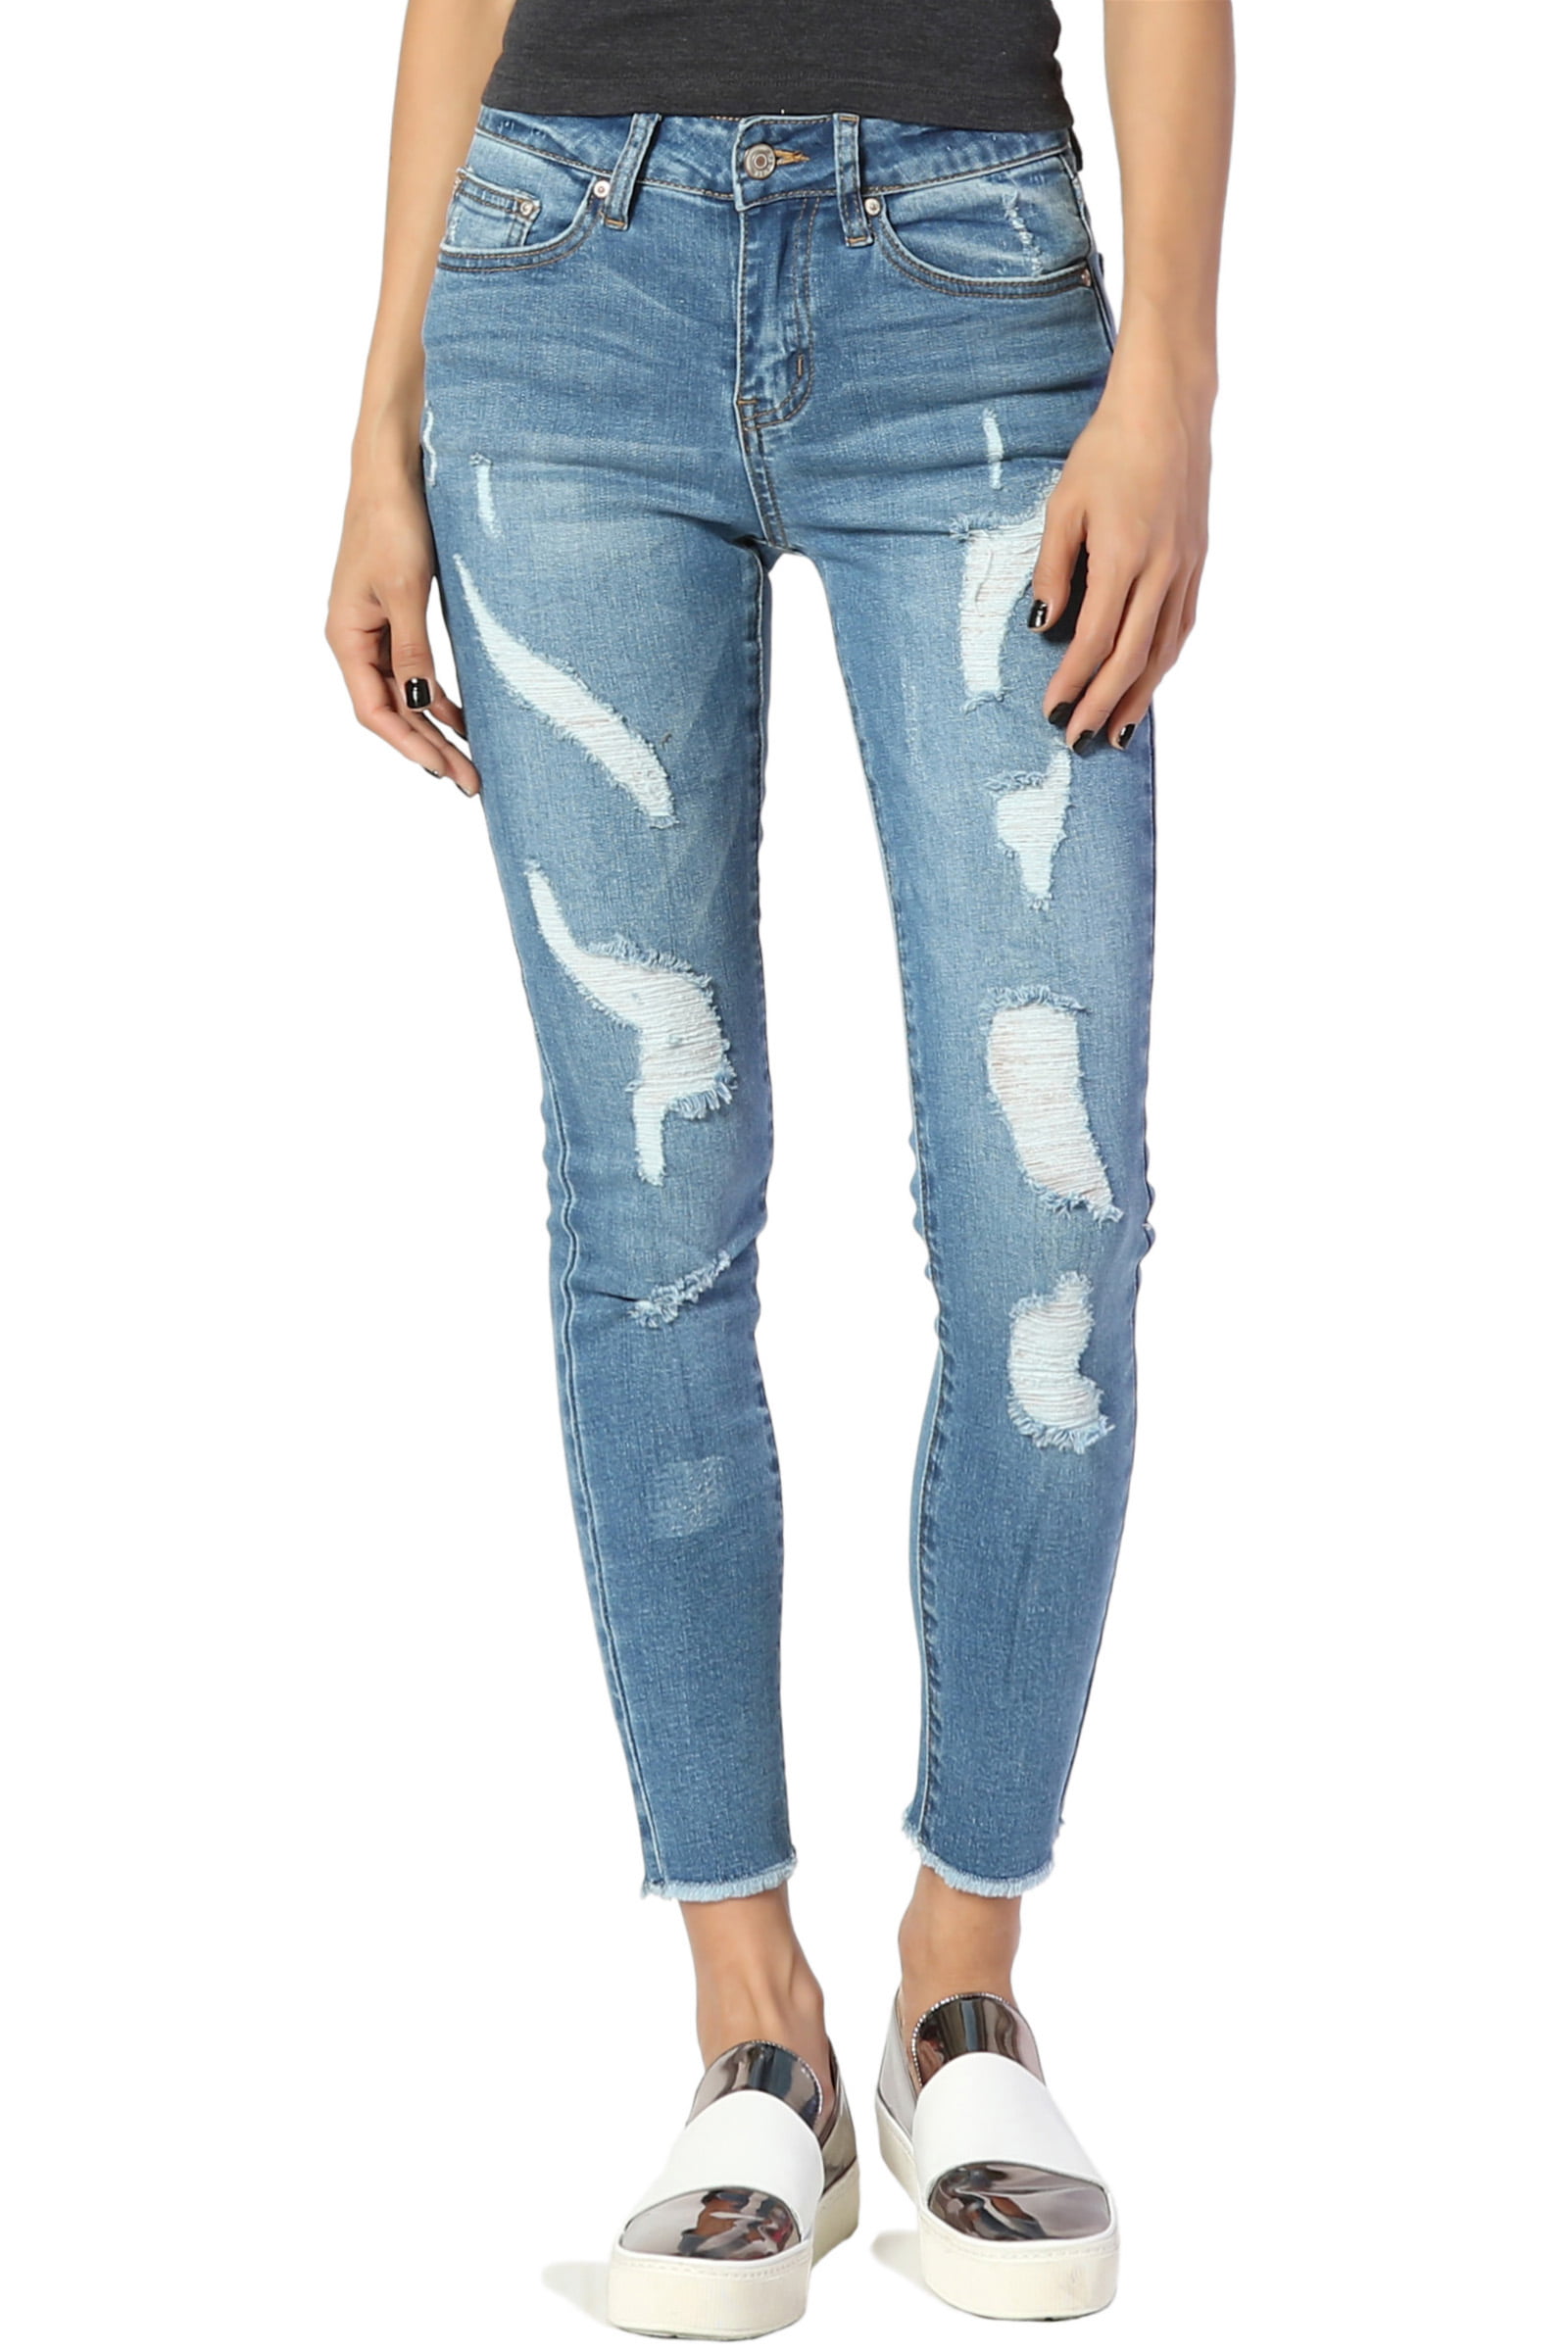 TheMogan Women's Distressed Ripped Stretch Mid Rise Med Blue Crop ...